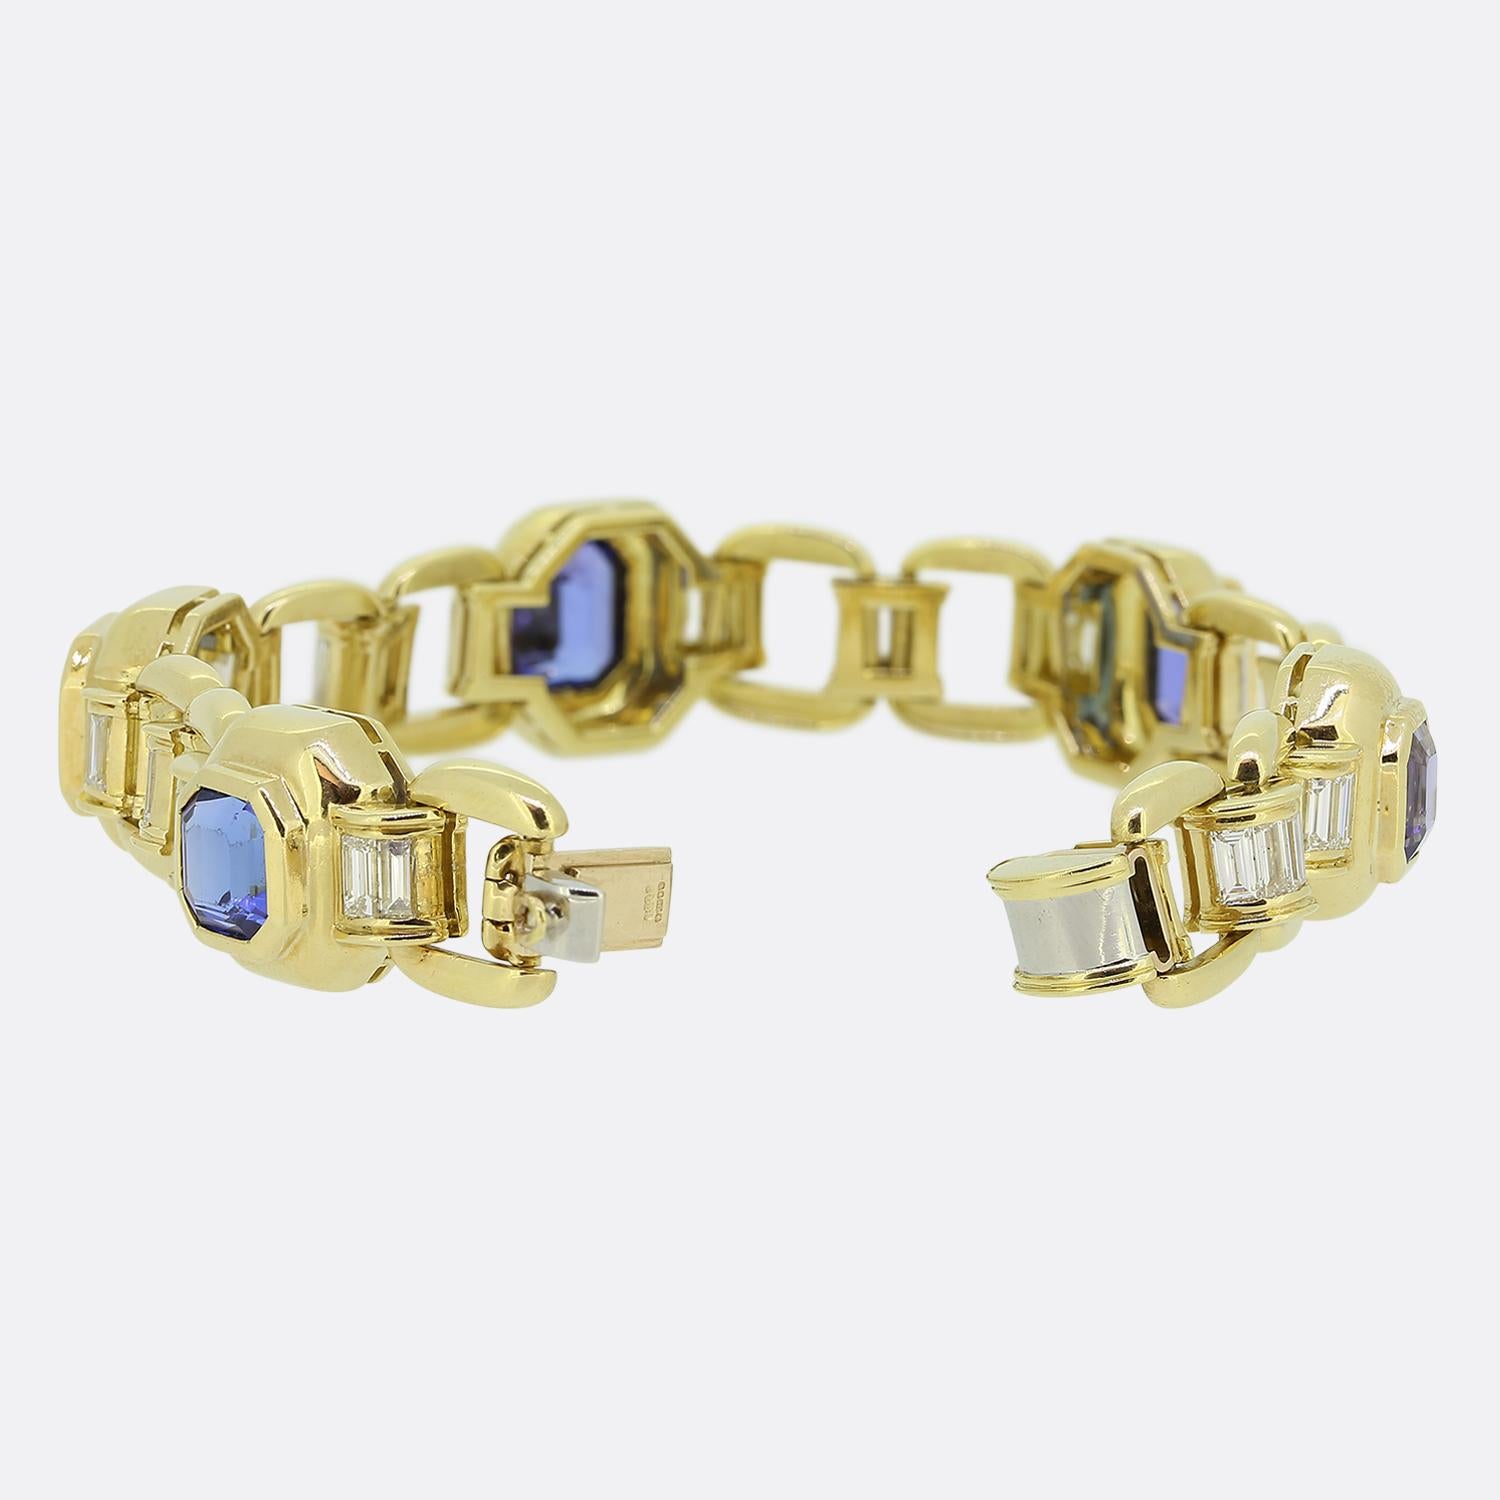 Here we have an outstanding bracelet from the world renowned jewellery designer, Boodles & Dunthorne. This piece has been crafted from 18ct yellow gold and showcases an open structure which plays host to five octagonal links set with octagonal step